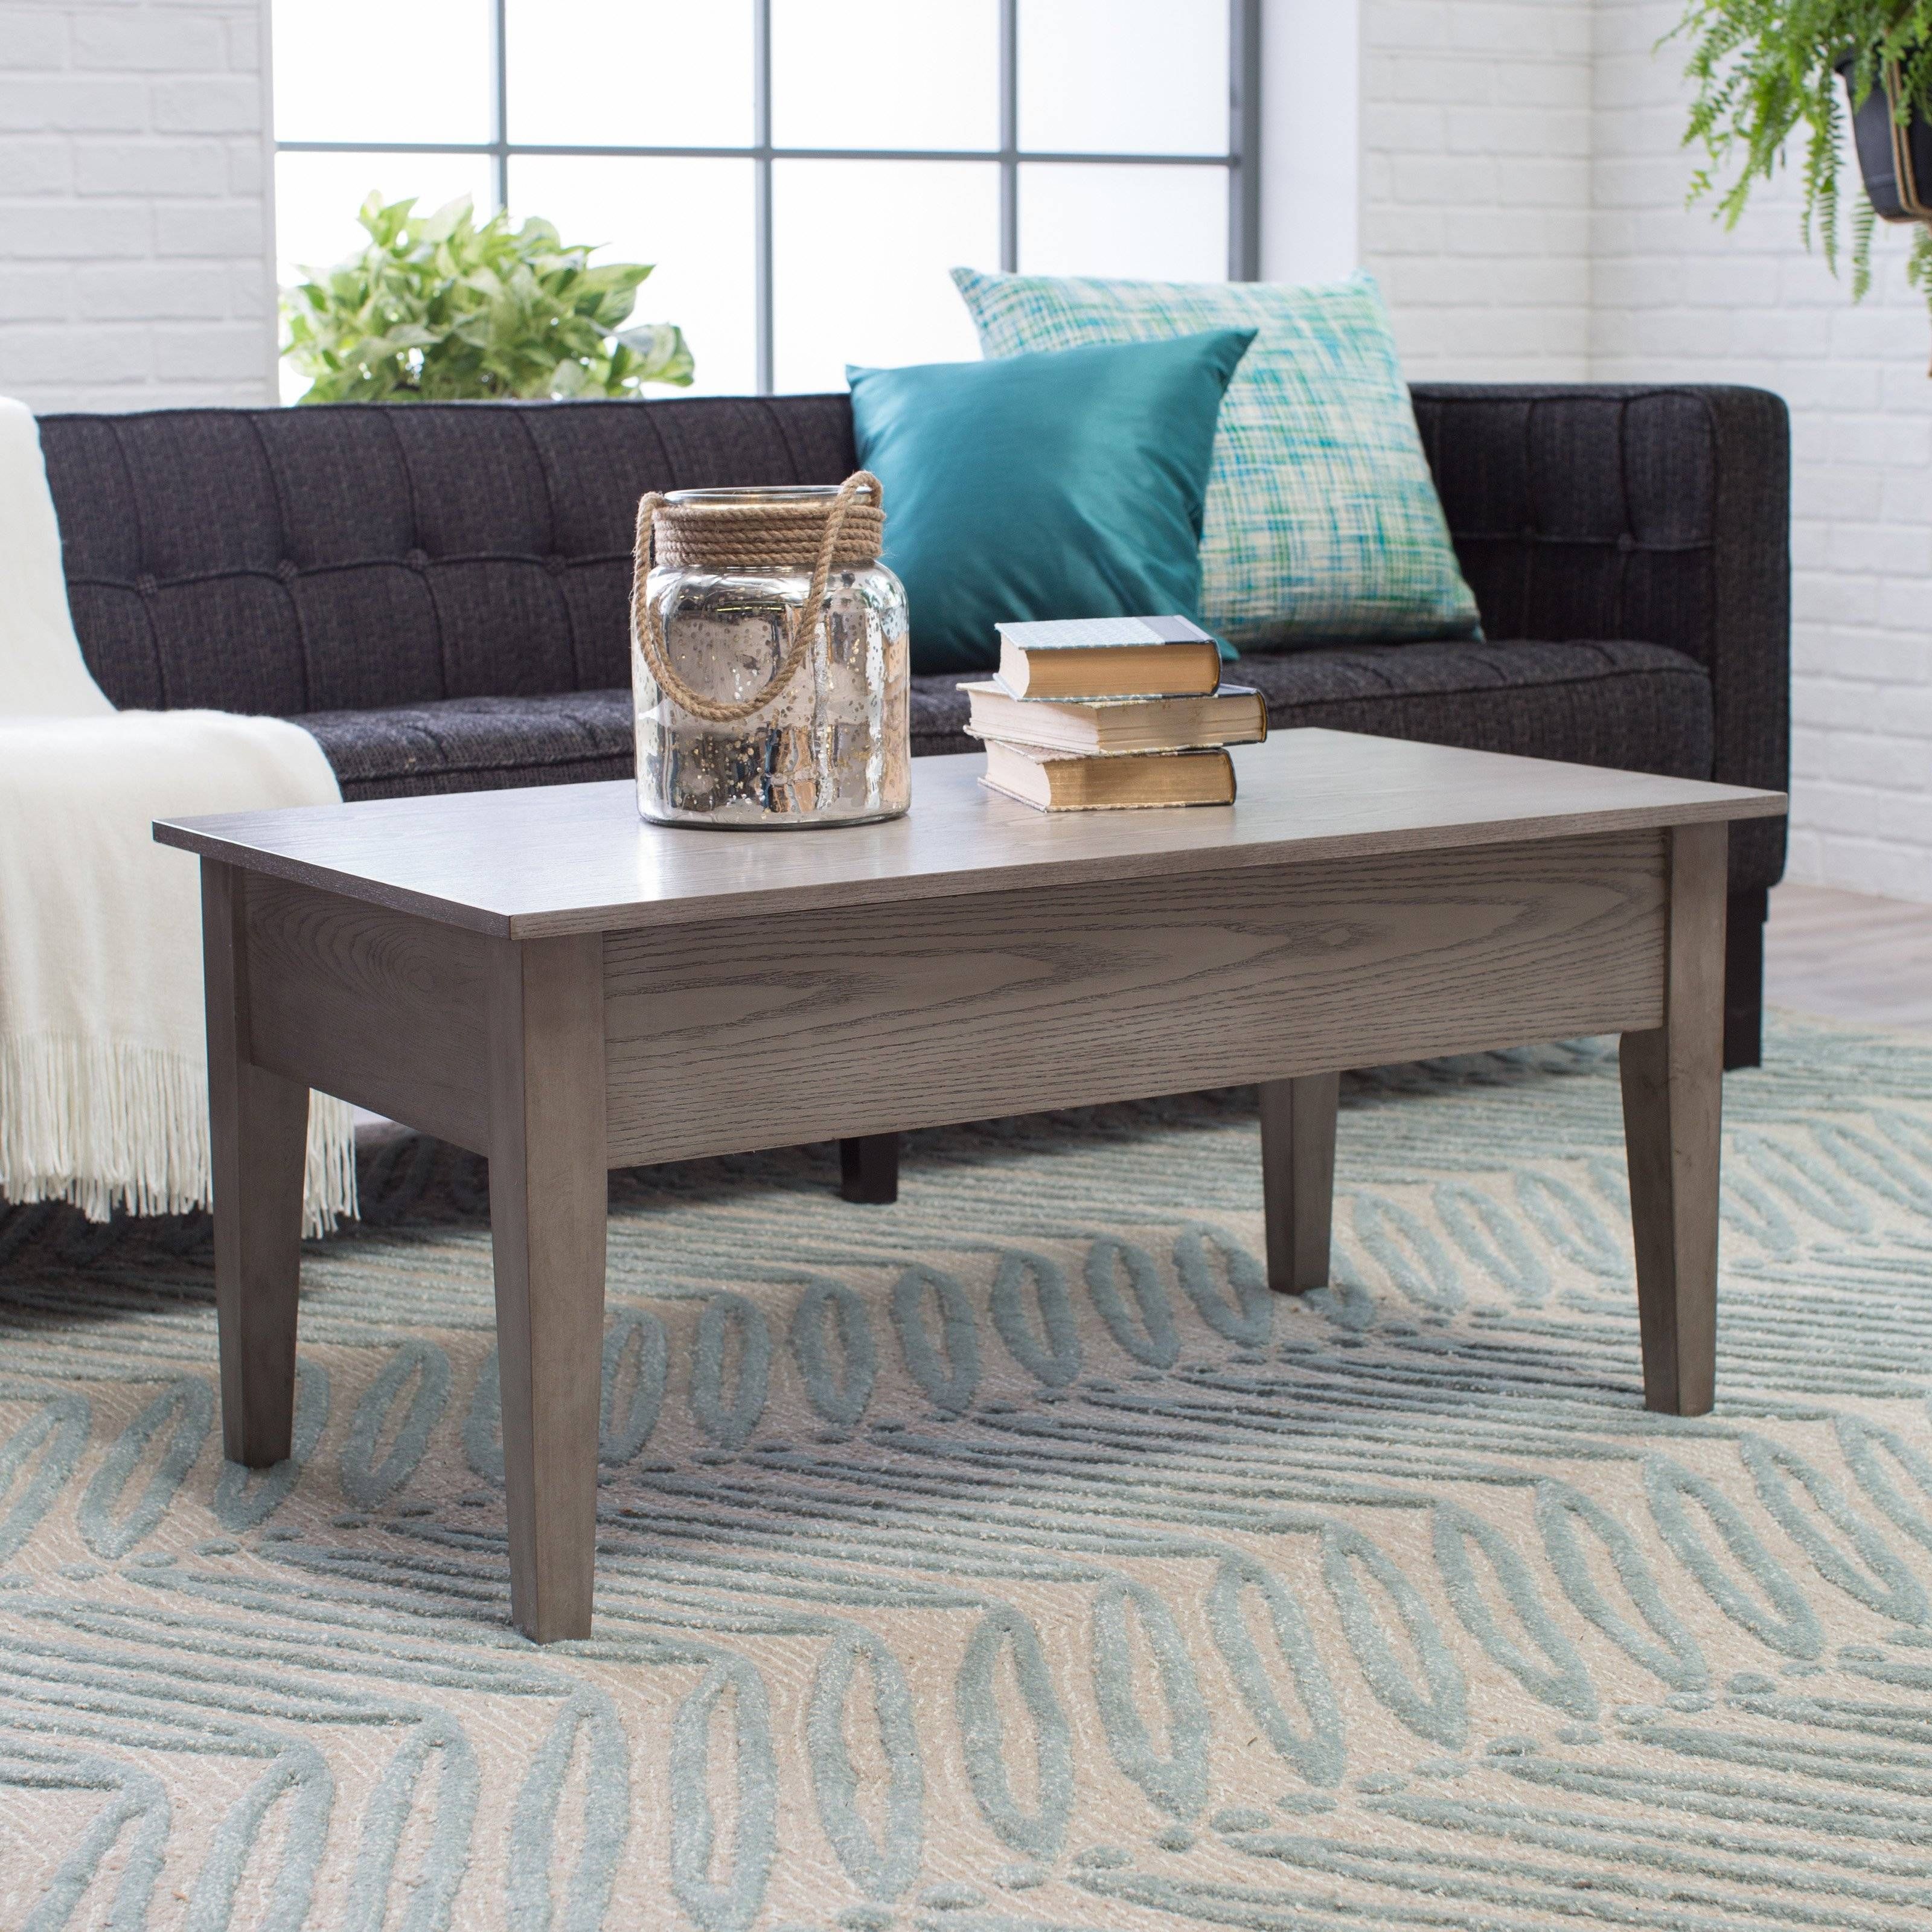 Turner Lift Top Coffee Table – Gray | Hayneedle Pertaining To Coffee Table With Raised Top (View 14 of 30)